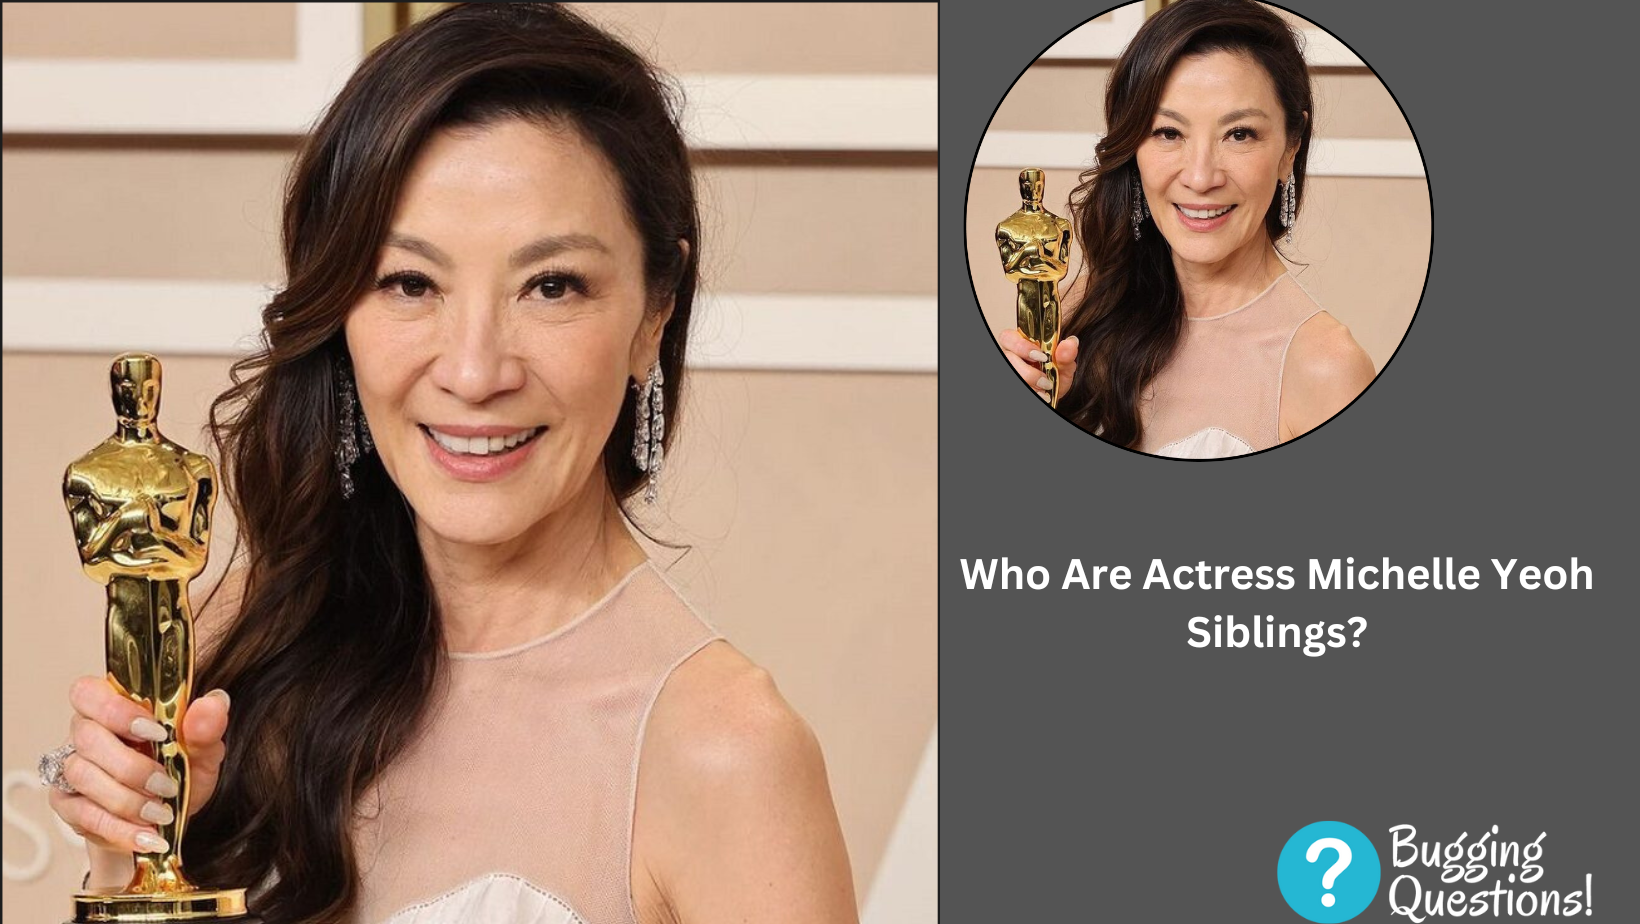 Who Are Actress Michelle Yeoh Siblings?